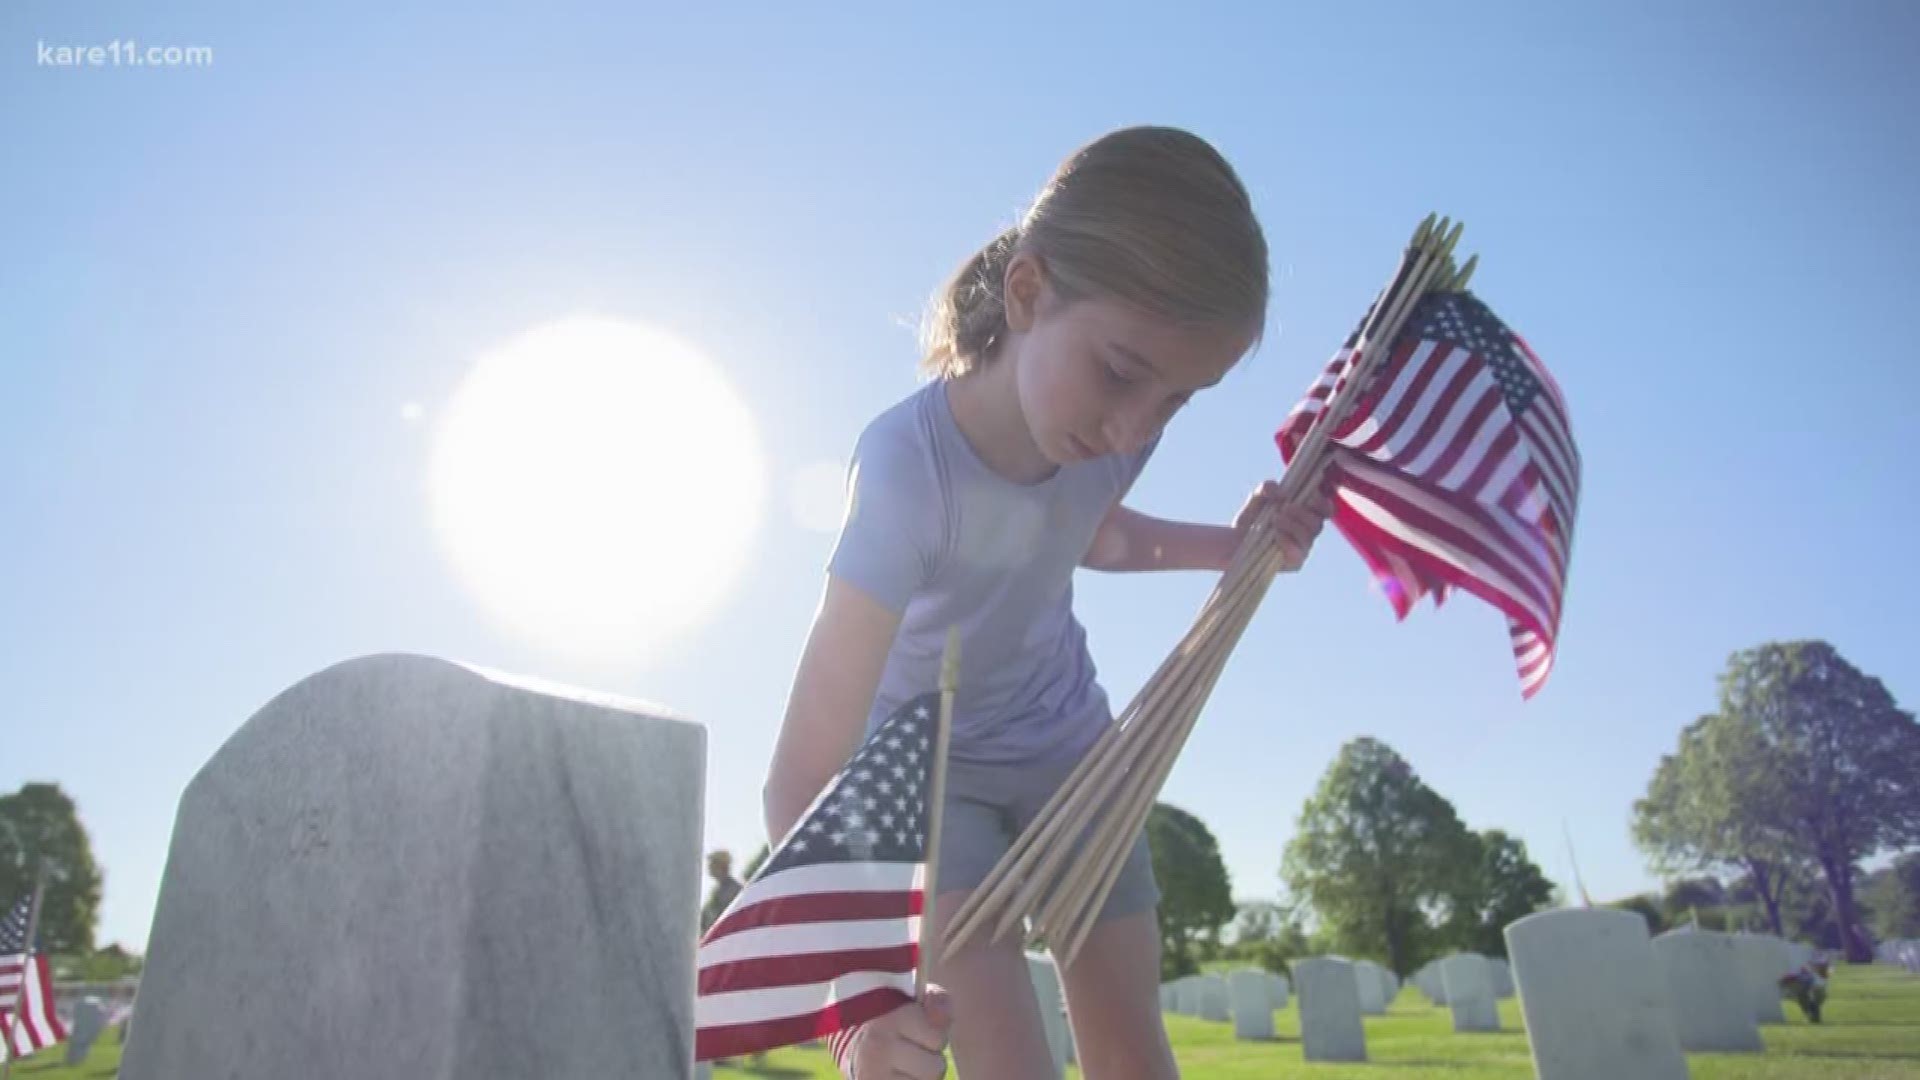 Because of the vast number of headstones, cemetery staff have not been able to put a flag on every headstone in an estimated 35 years. That all changed on Saturday. https://kare11.tv/2IQEWes